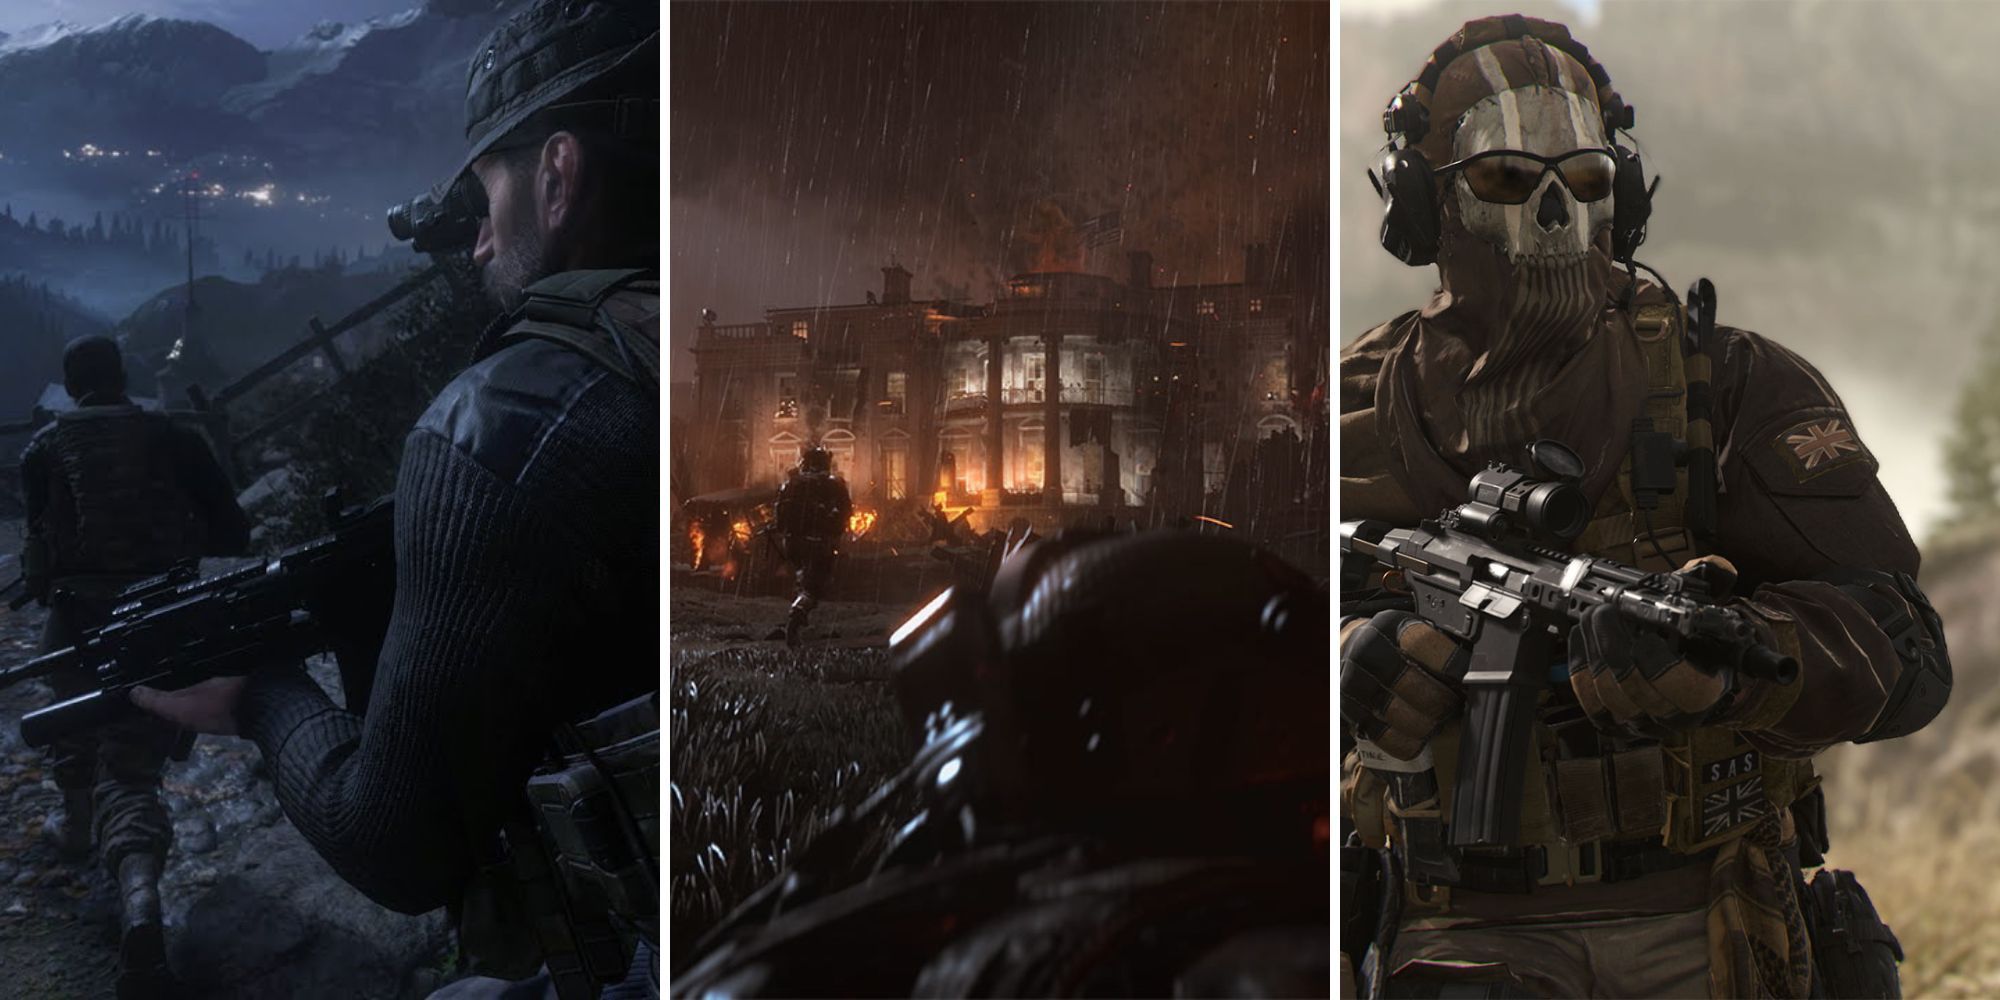 A grid showing the call of duty games Call of Duty: Modern Warfare Remastered, Call of Duty: Modern Warfare 2 Remastered, and Call of Duty: Modern Warfare 2 (2022)